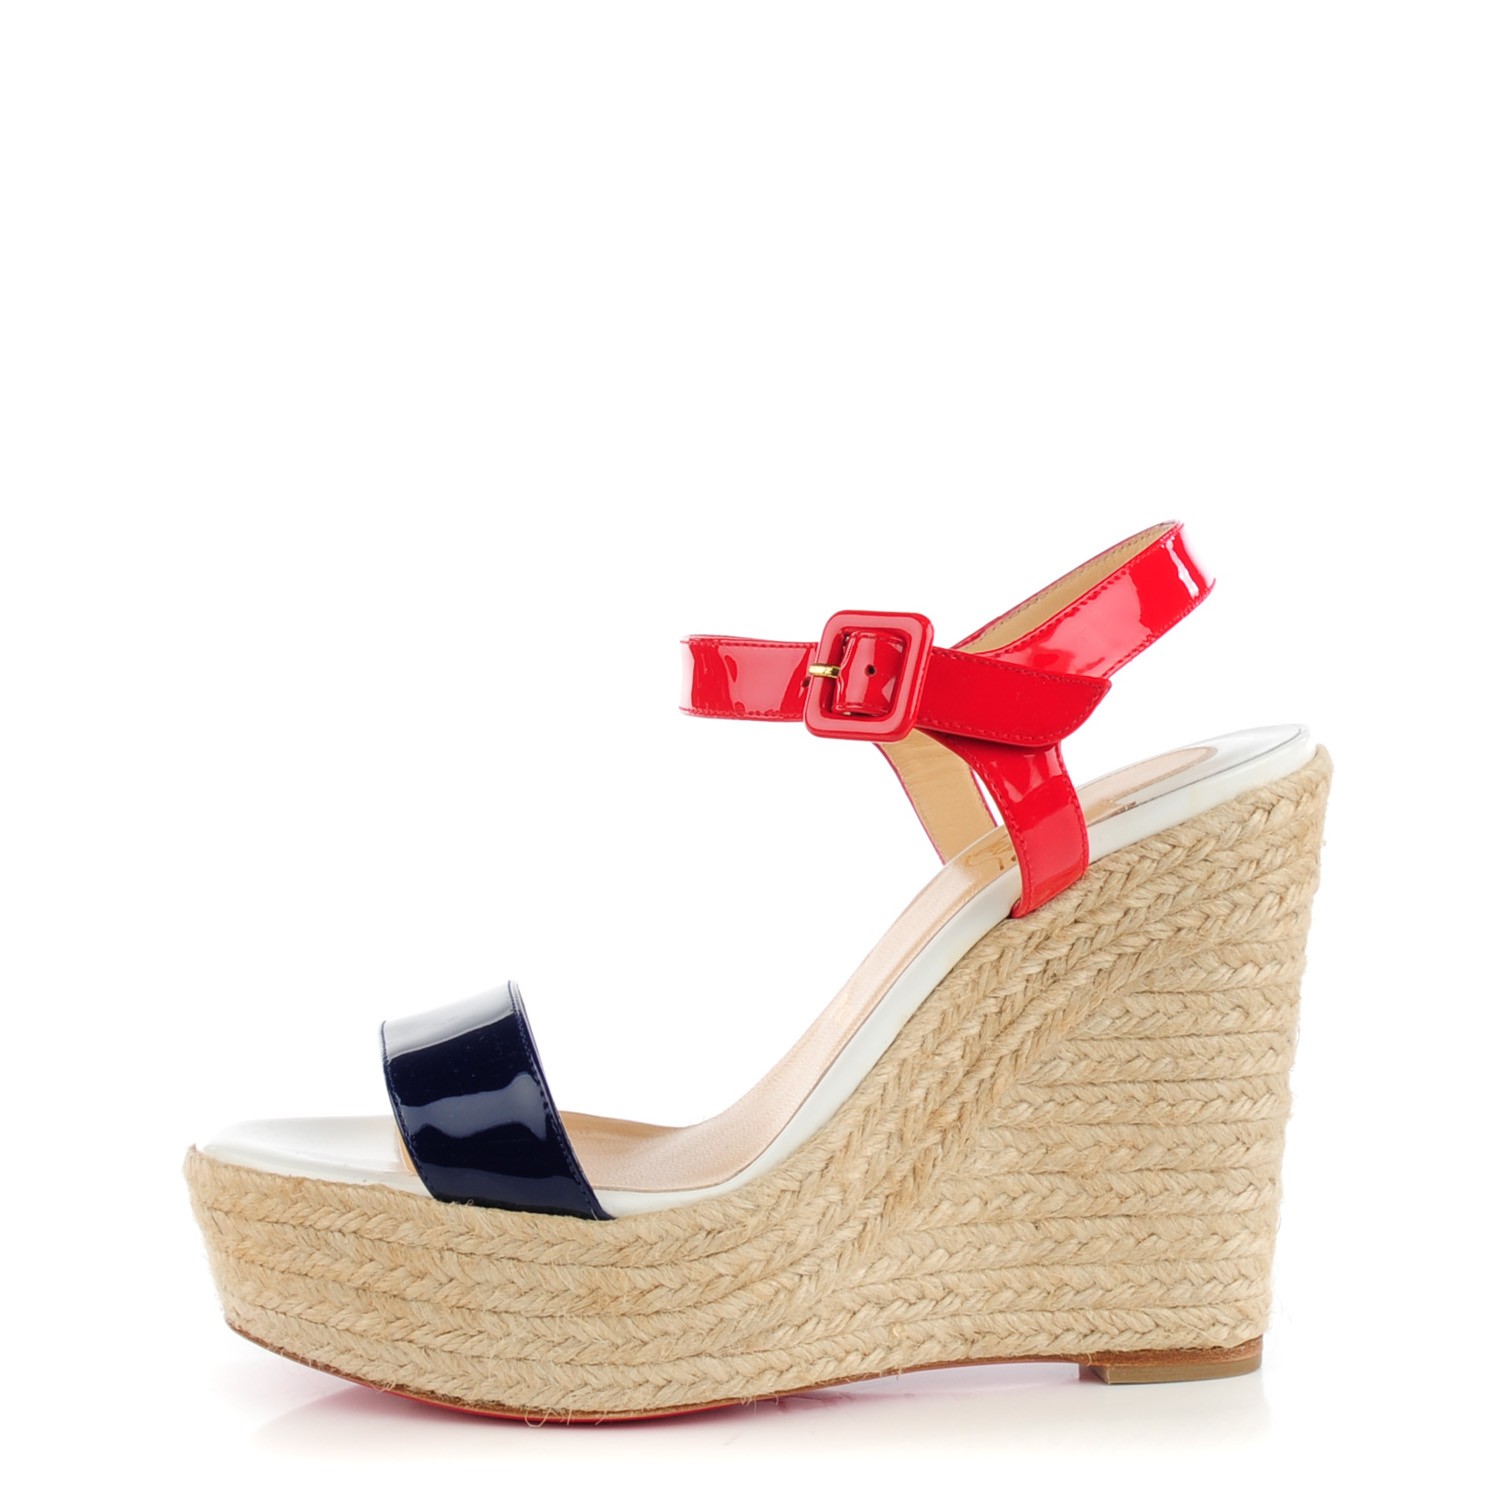 red and white espadrilles